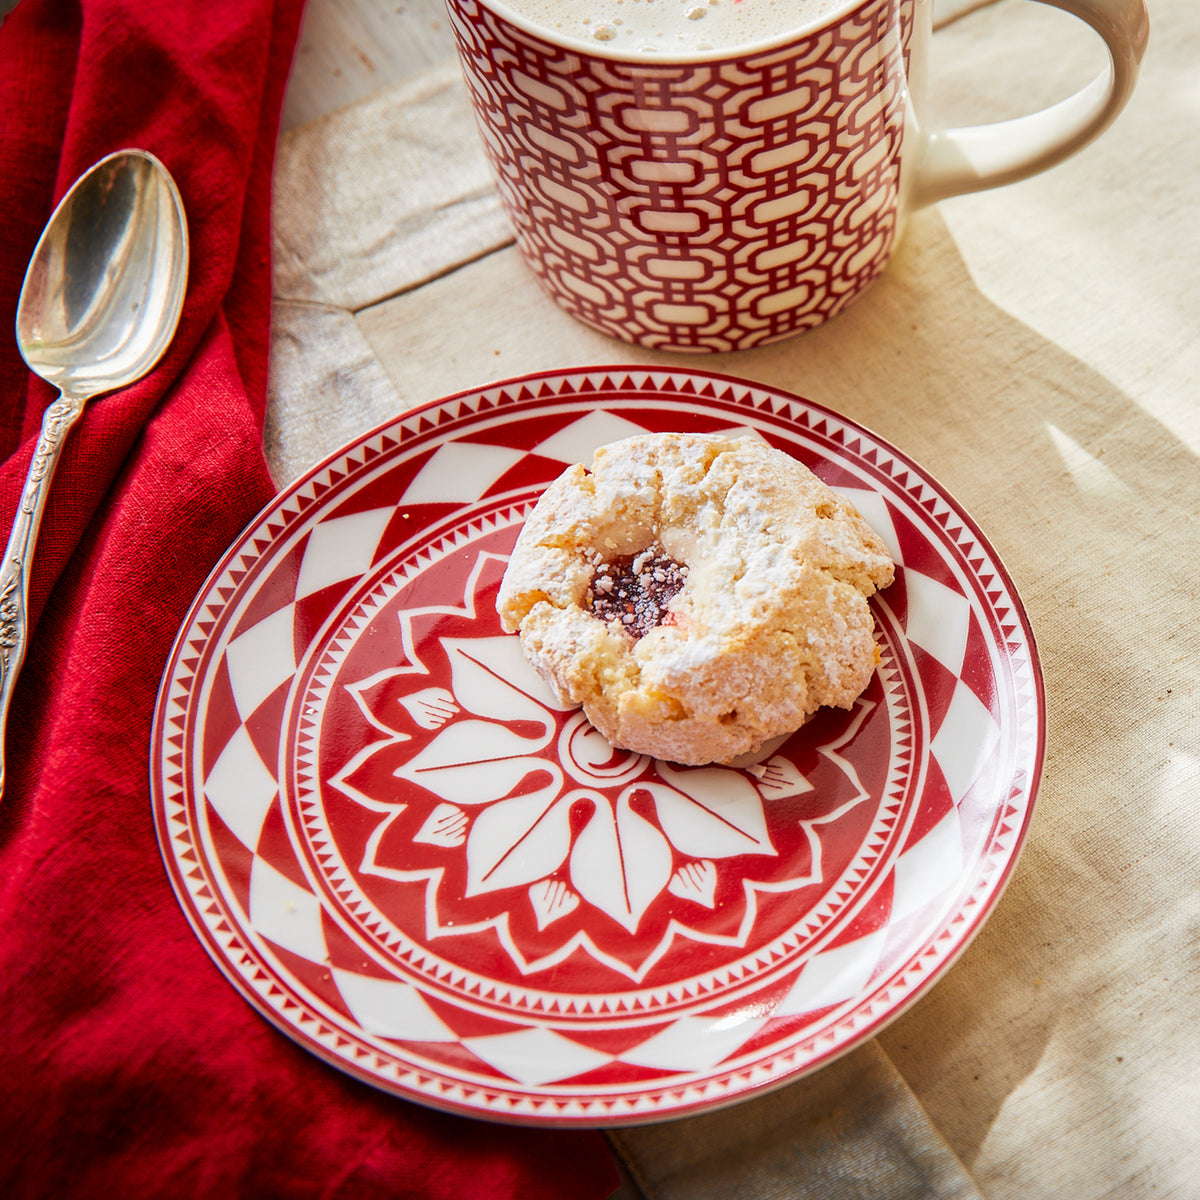 A neatly arranged plate with a single pastry topped with powdered sugar and a dollop of jam sits on a red and white patterned Fez Crimson Small Plate by Caskata Artisanal Home, part of our heirloom-quality dinnerware collection, next to a matching mug and spoon on a tablecloth.